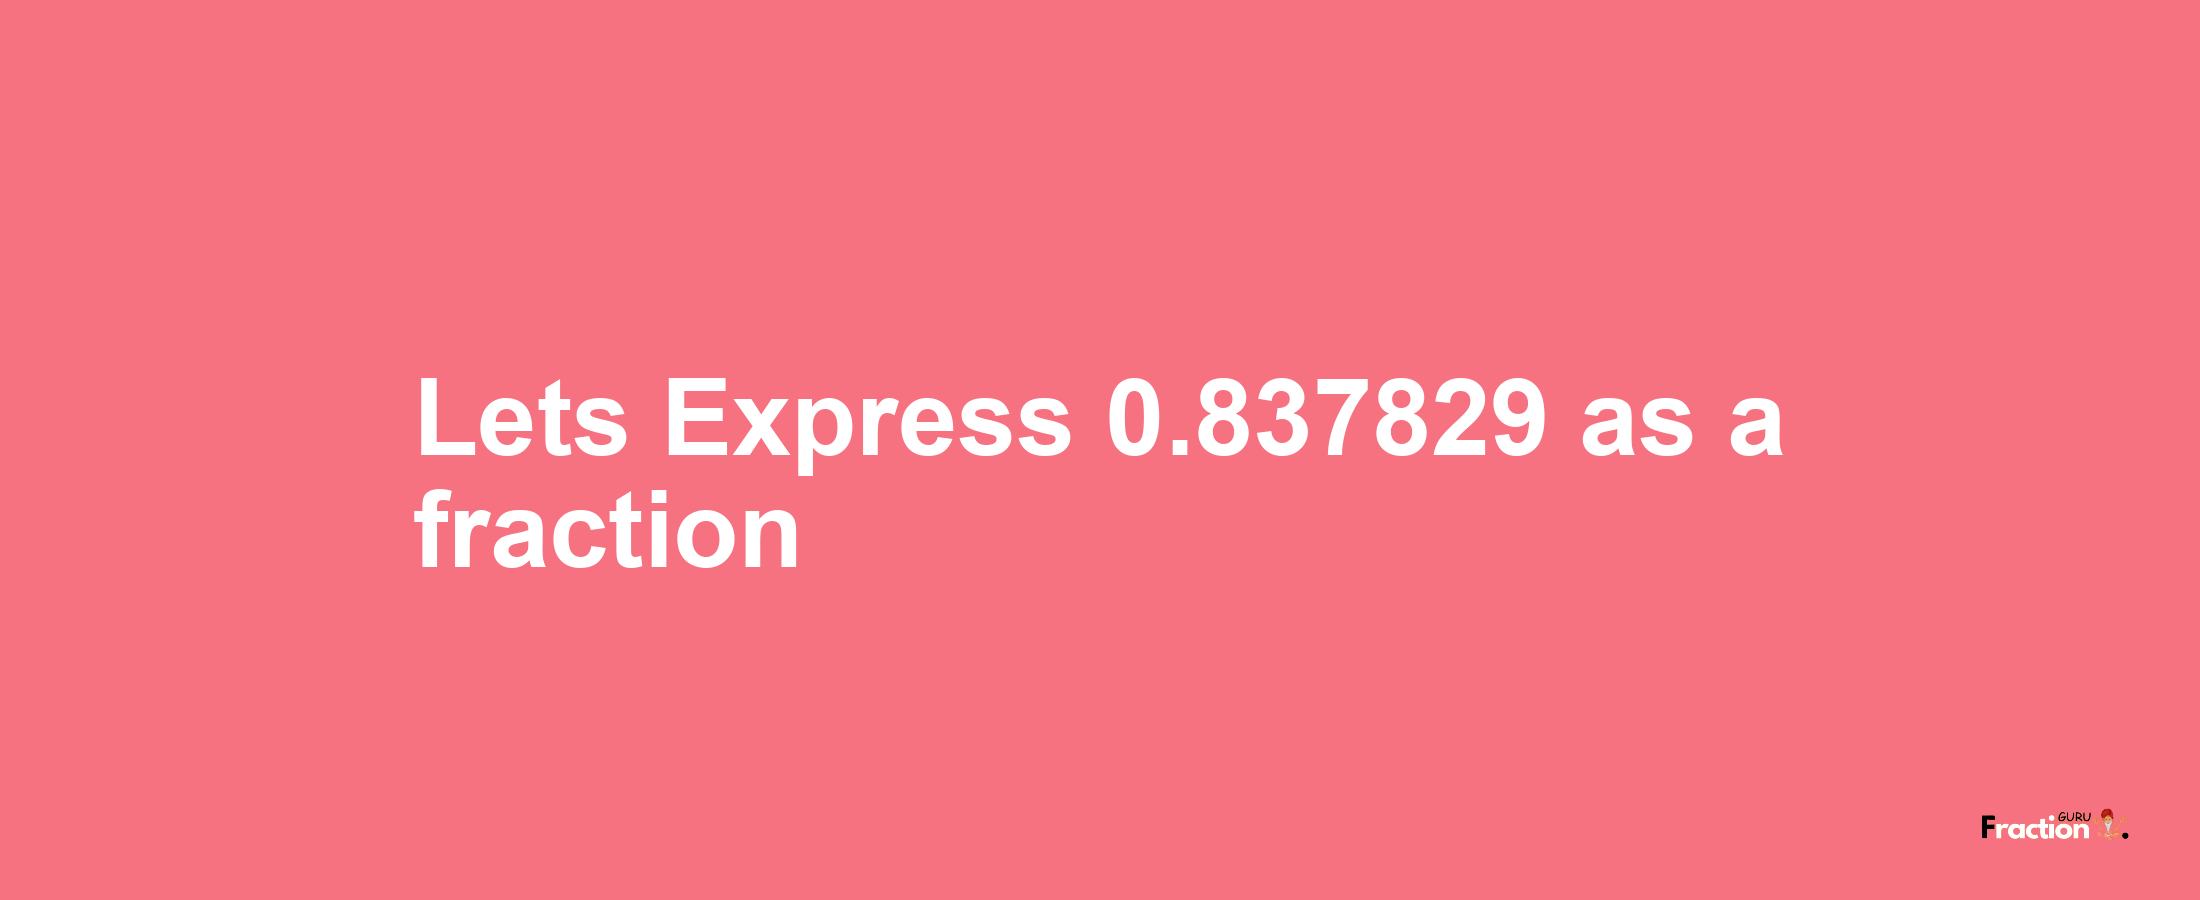 Lets Express 0.837829 as afraction